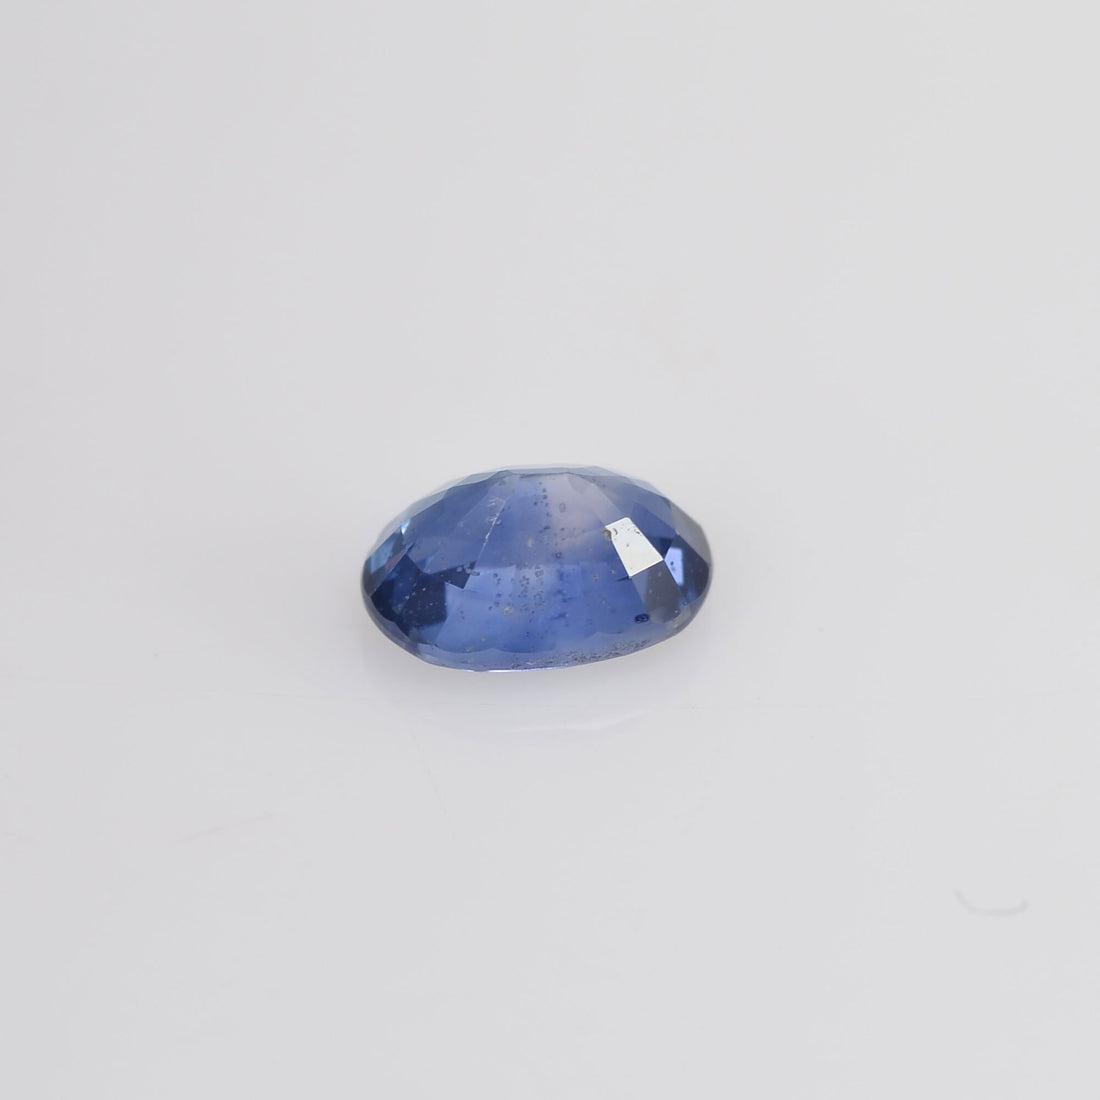 0.72 Cts Natural Blue Sapphire Loose Gemstone Oval Cut